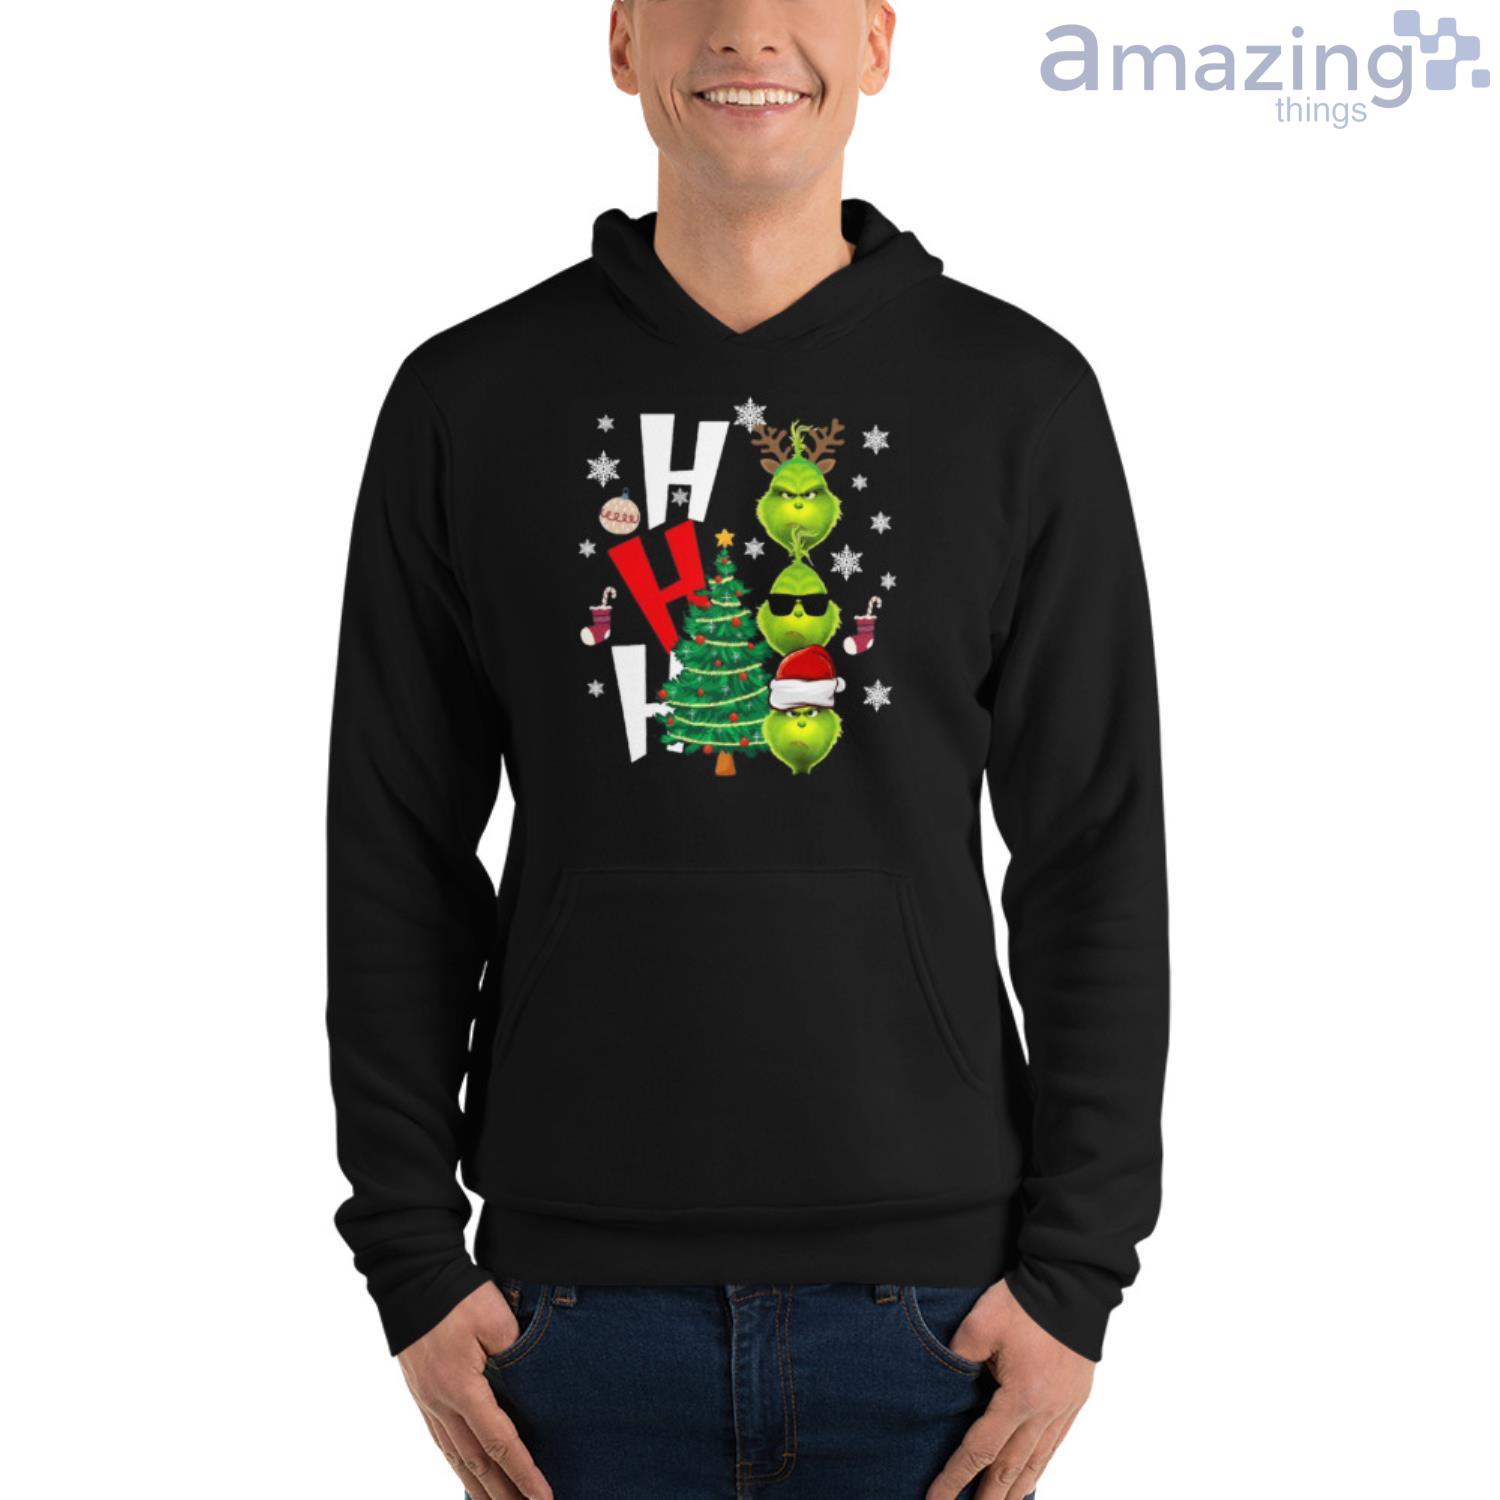 Hollow Hoodie or Legging for Fan |The Grinch-Christmas Shirt 